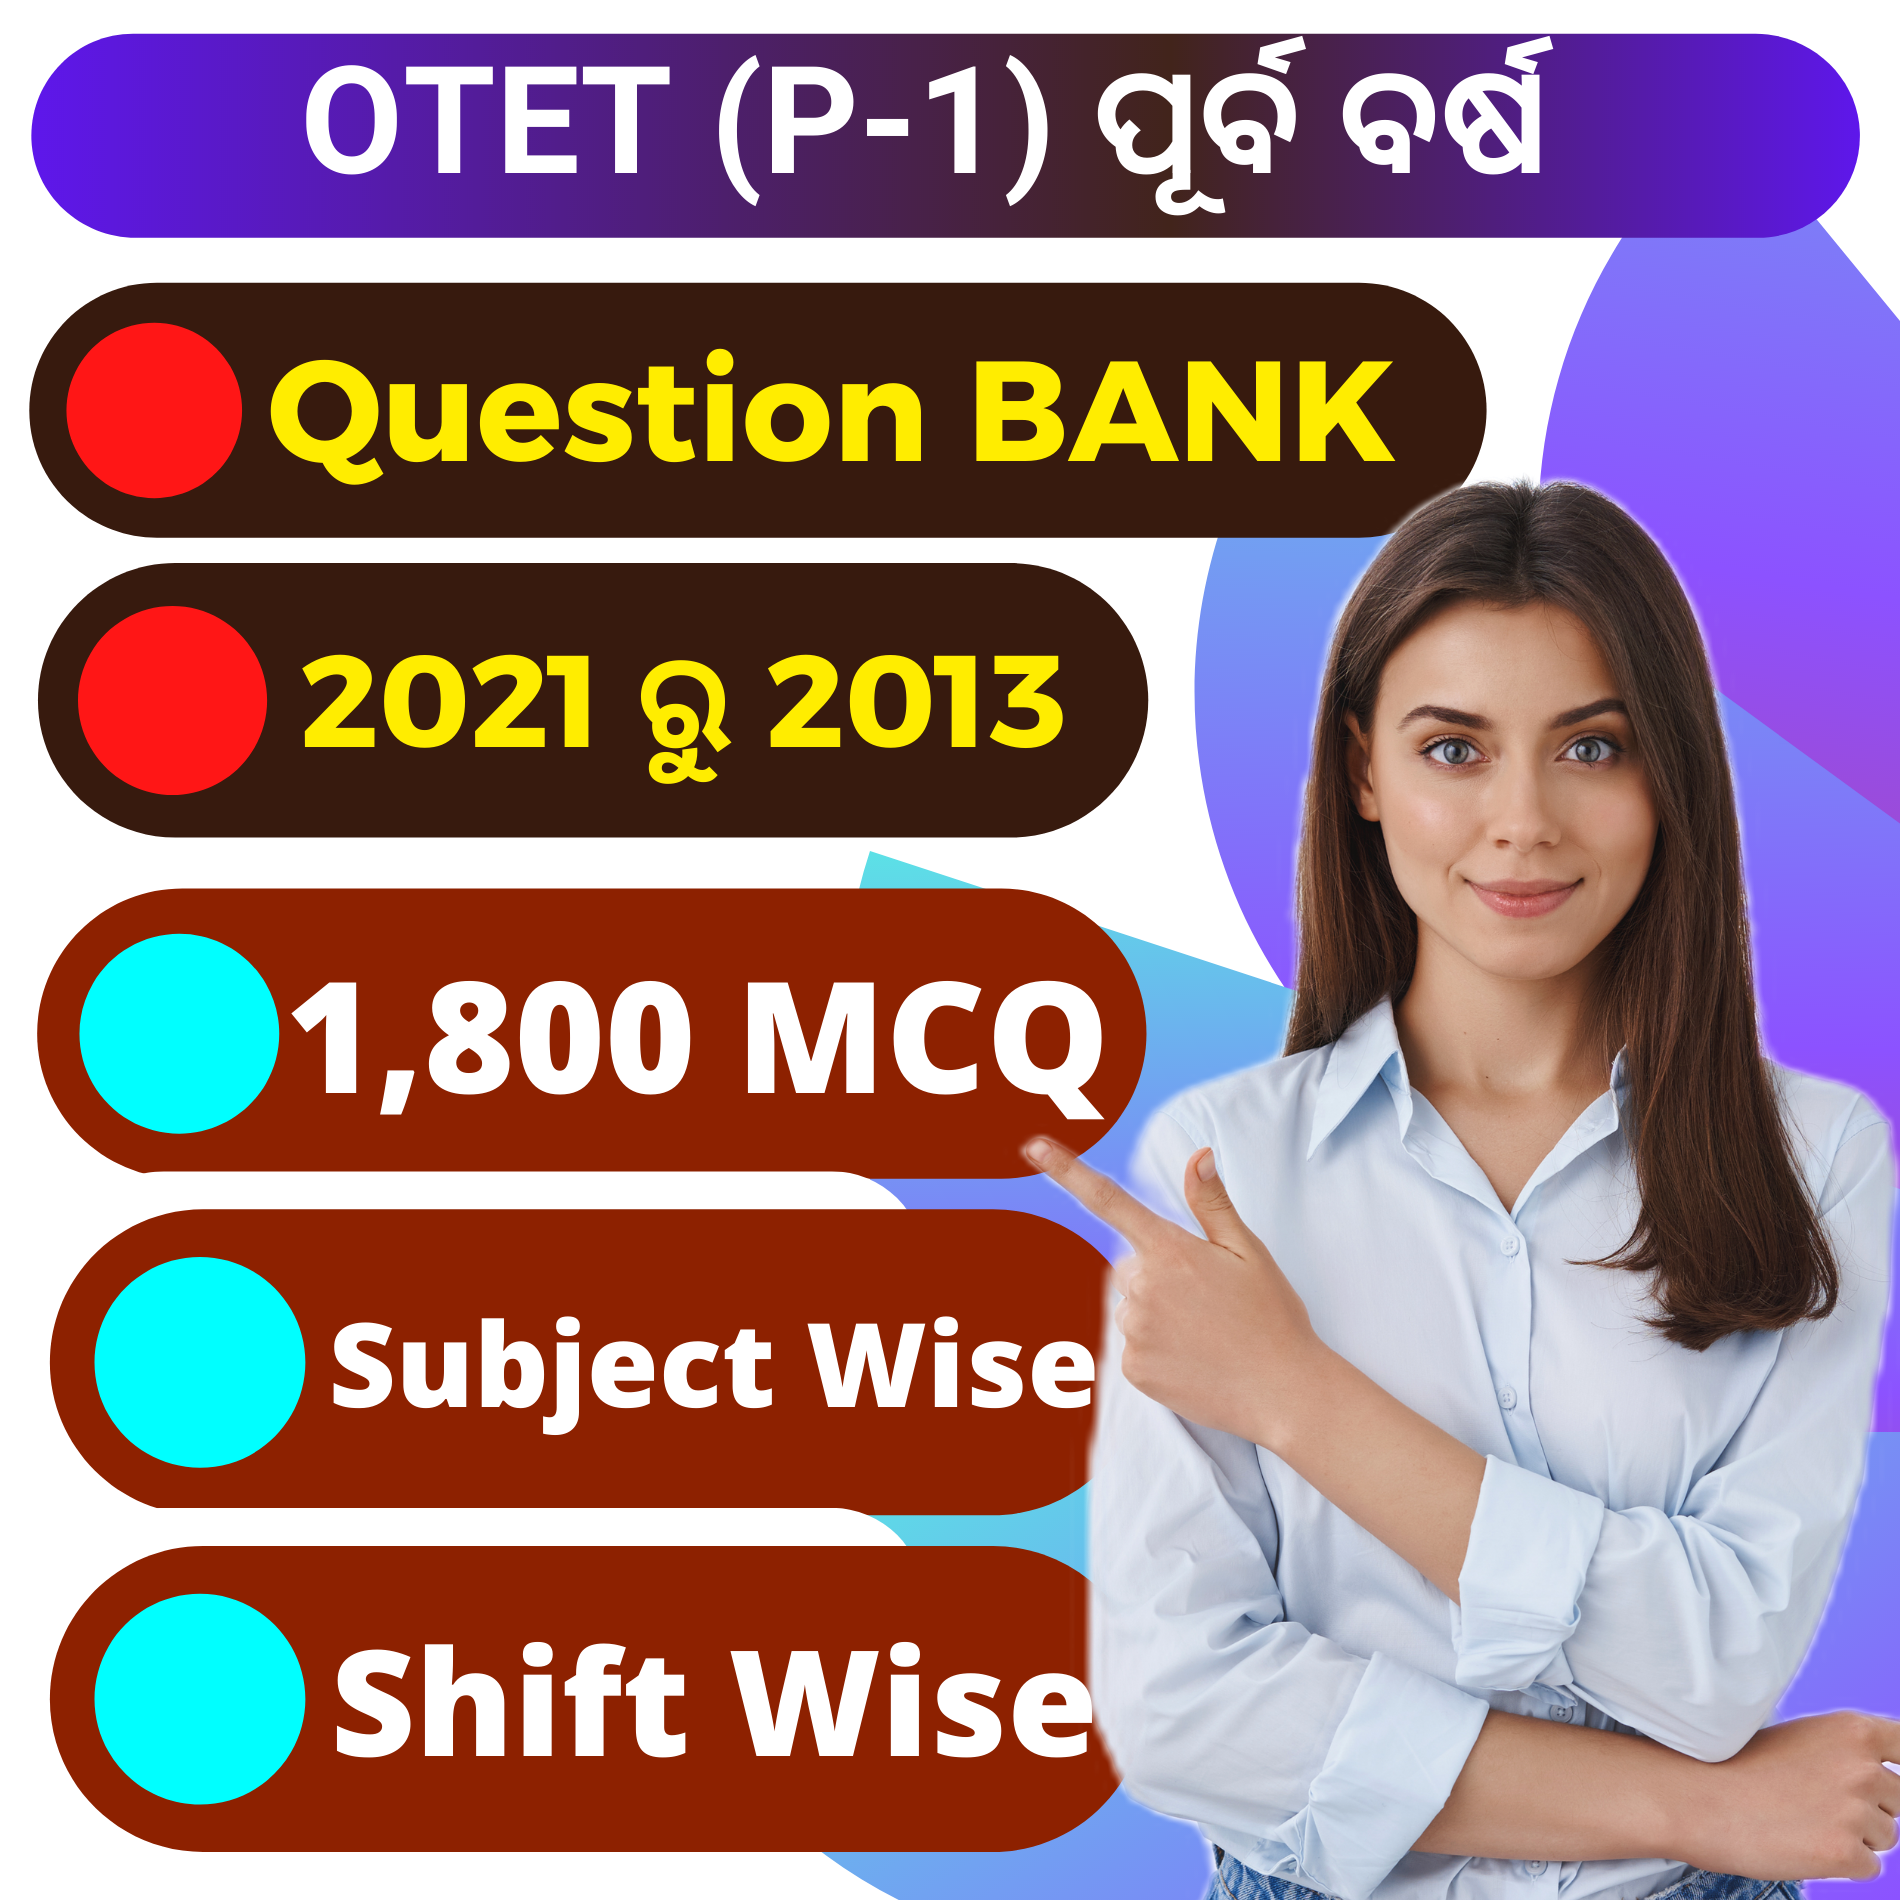 D- OTET P-1 EXAM QUESTION BANK (SUBJECT WISE &amp; SHIFT WISE PREVIOUS YEAR QUESTIONS &amp; ANSWER 2021 To 2013) 